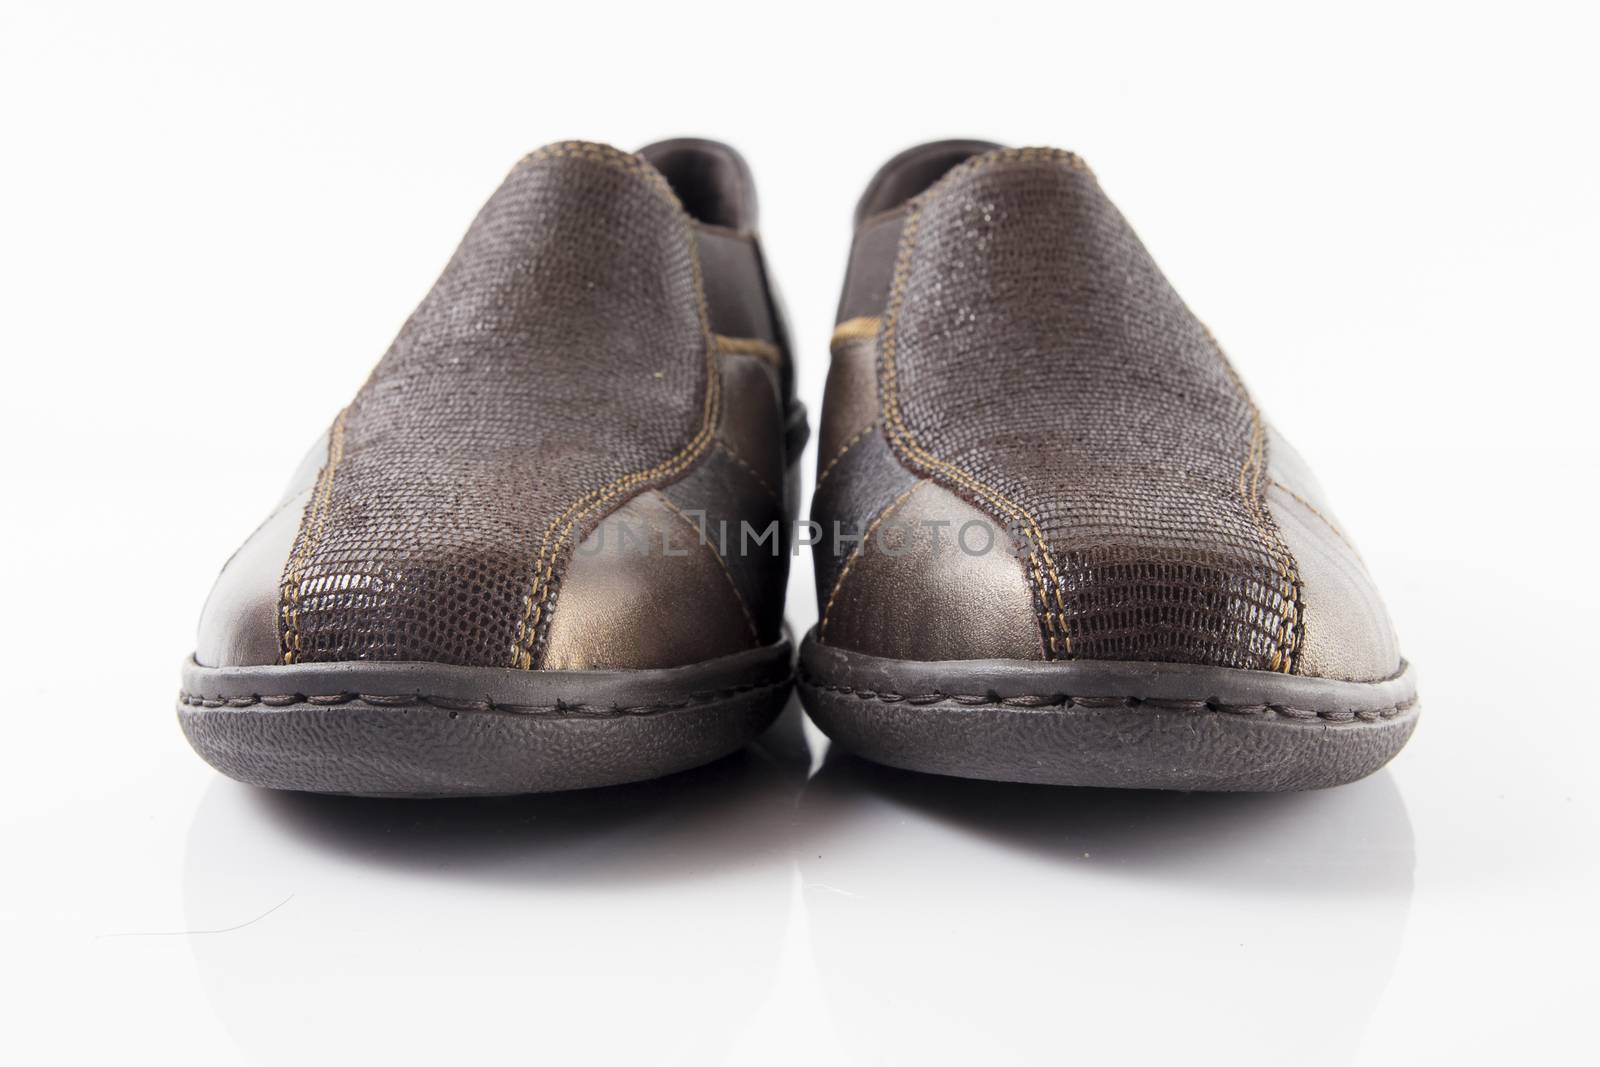 Pair of brown leather shoes on white background, isolated product, top view.